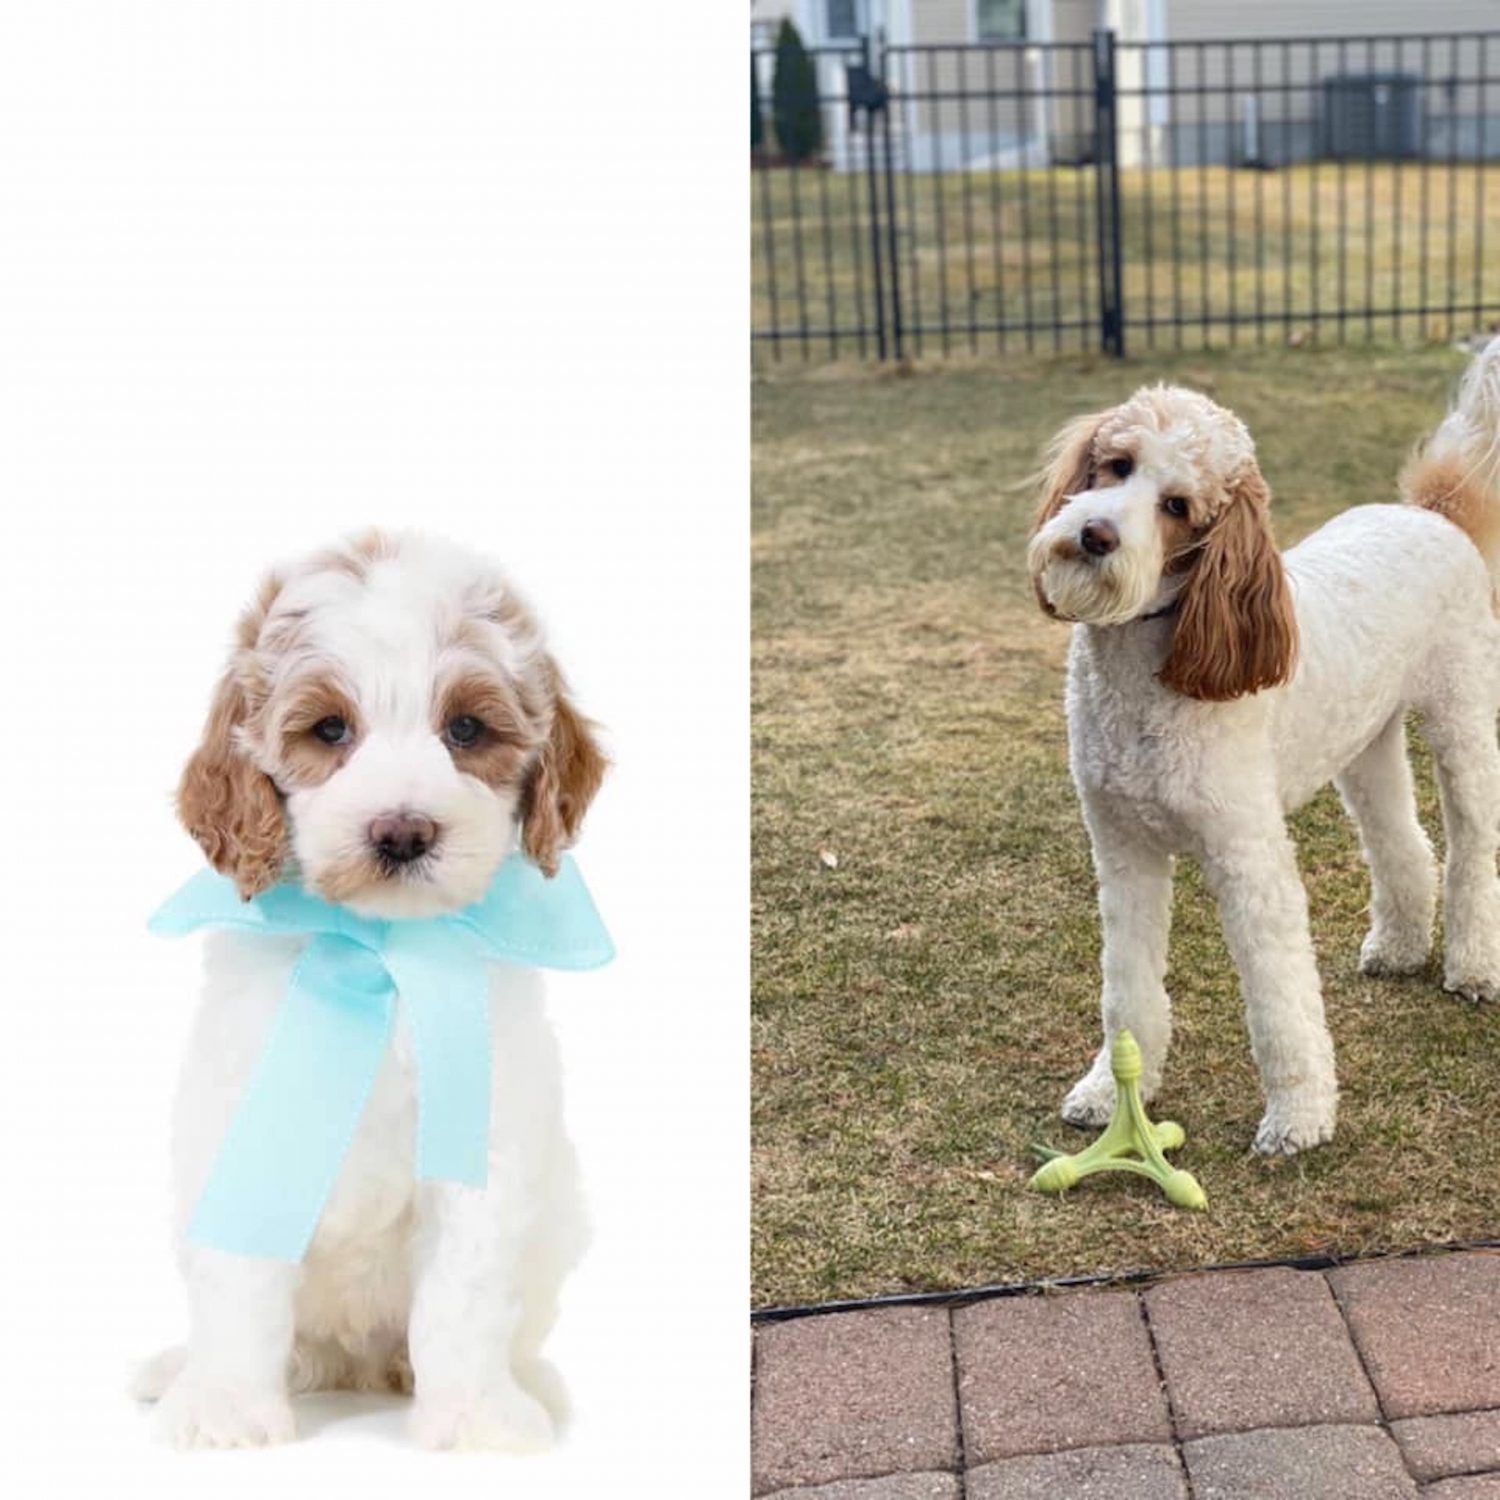 F1BB Goldendoodle is considered to be non-allergenic and make great family pets. This image shows the development of a Goldendoodle over time, from a puppy to a mature dog.